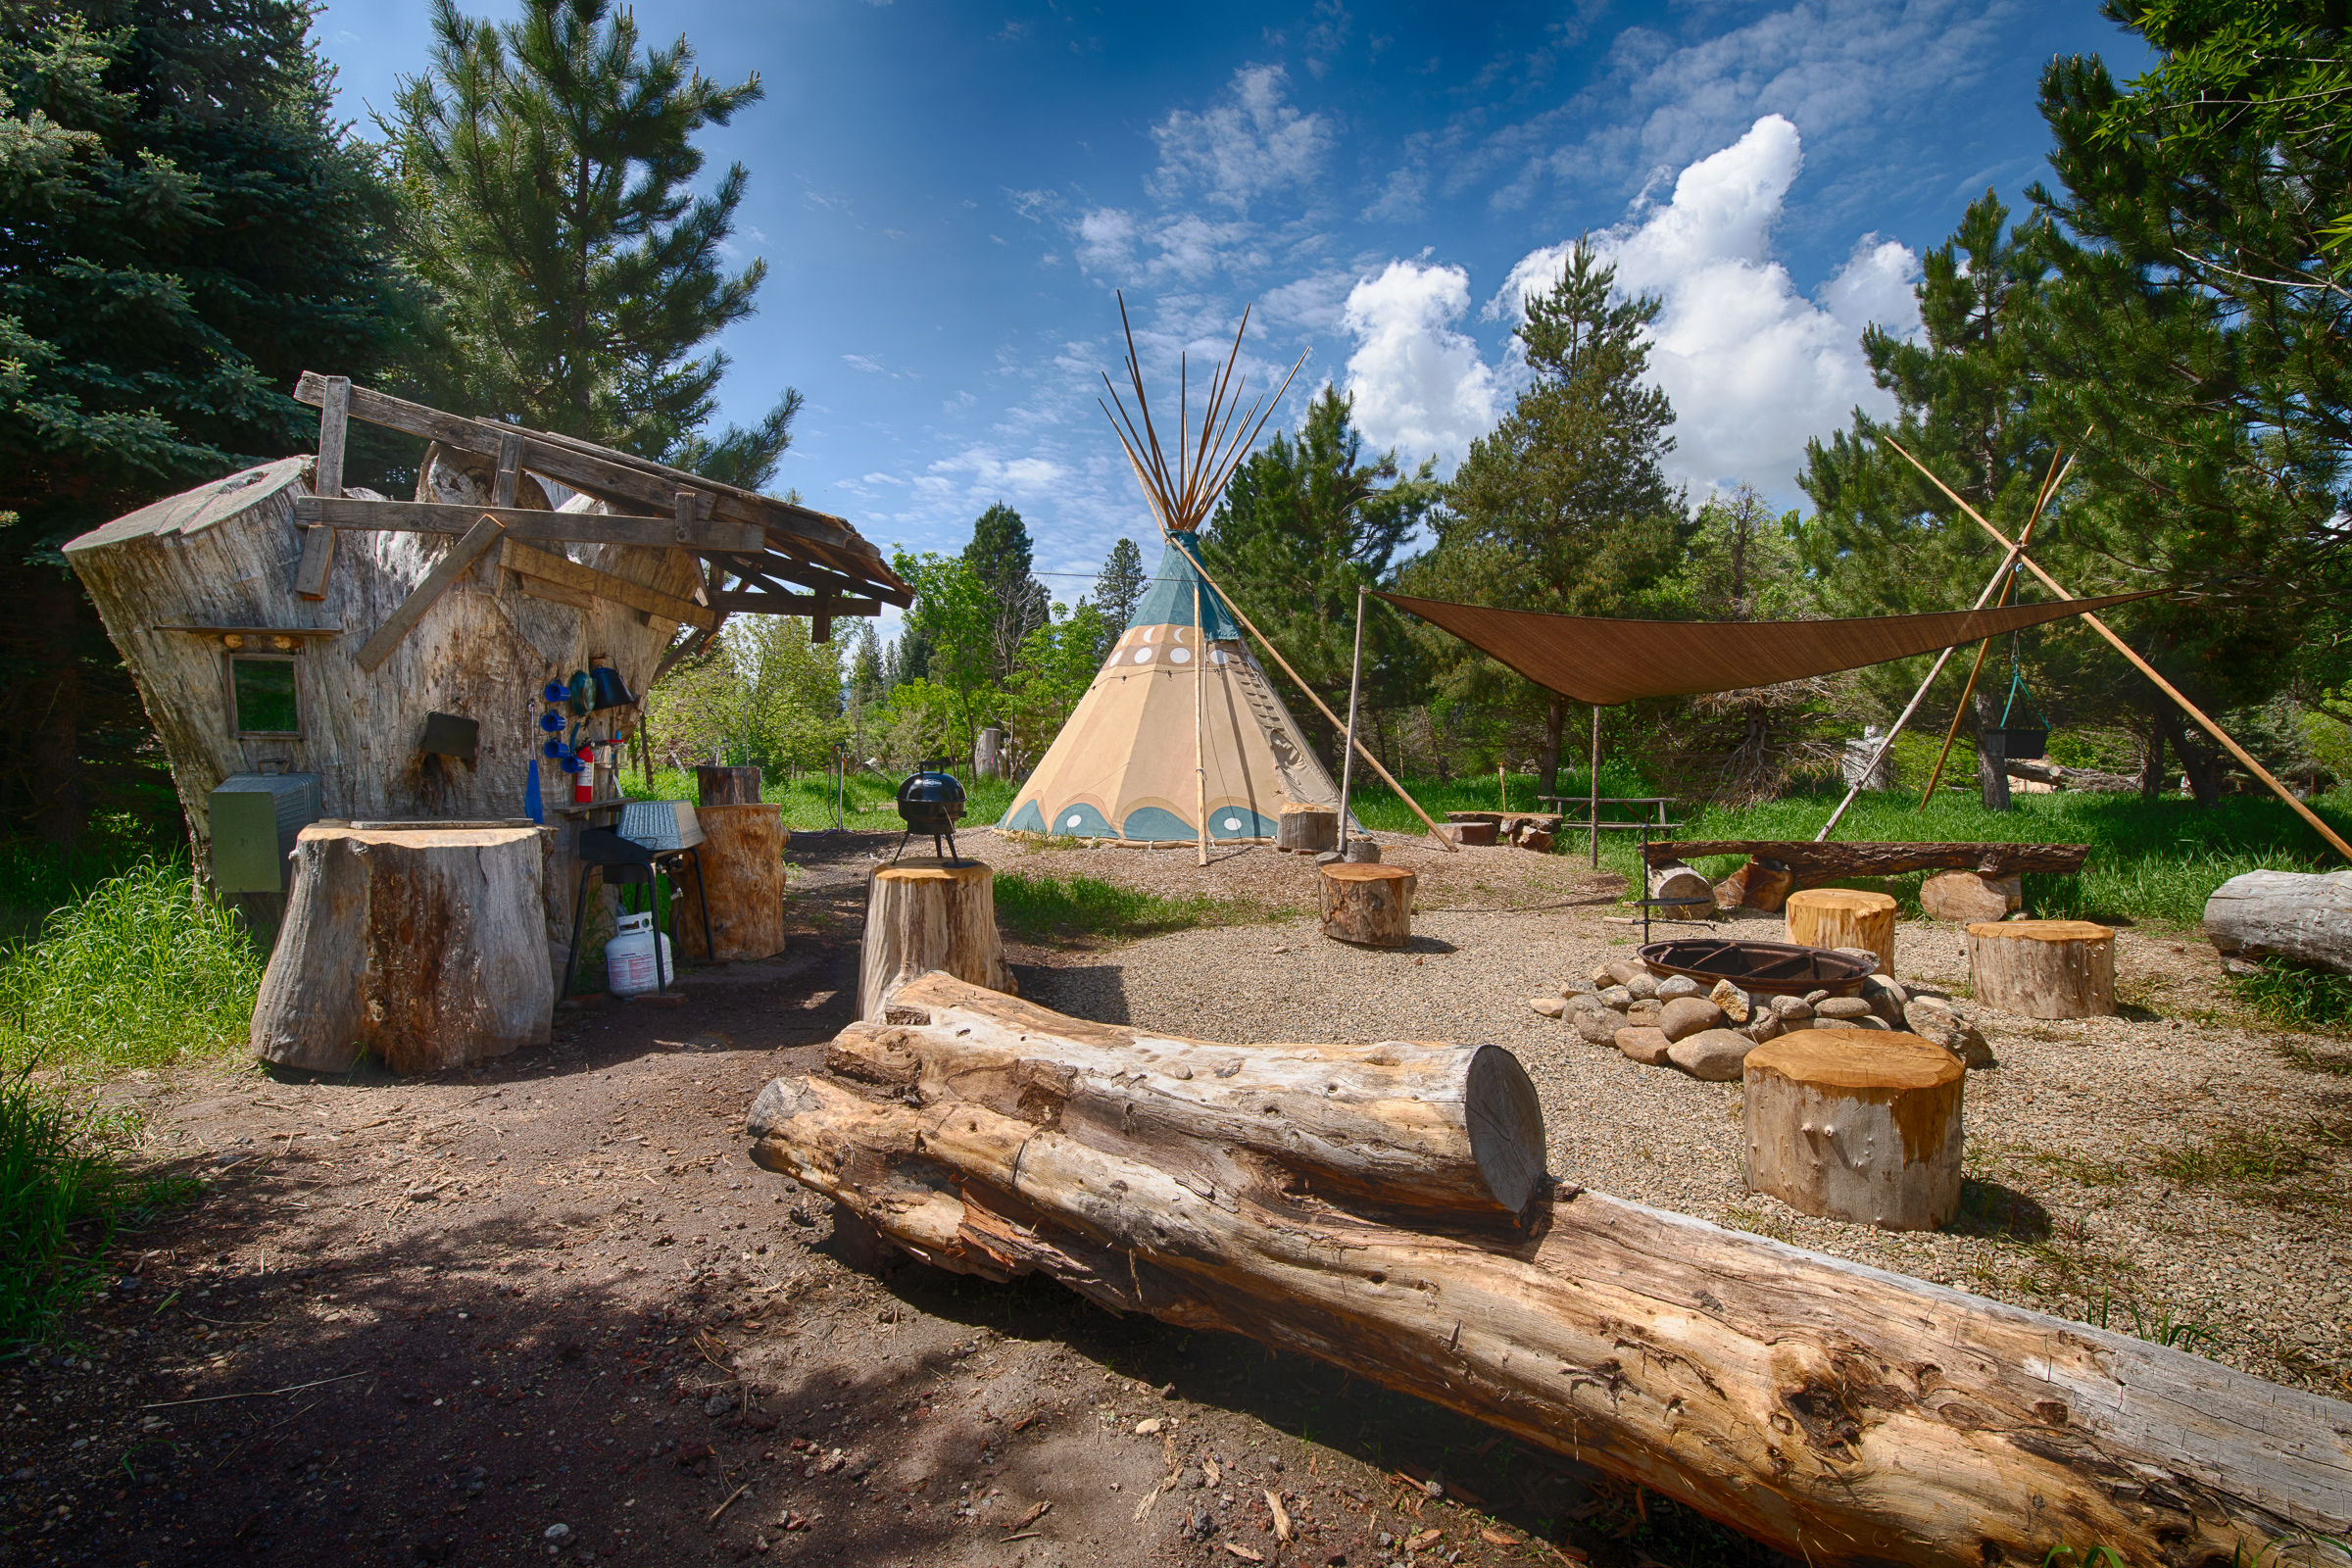 Gorgeous campsite with authentic teepee, firepit and rustic kitchen available for rent.